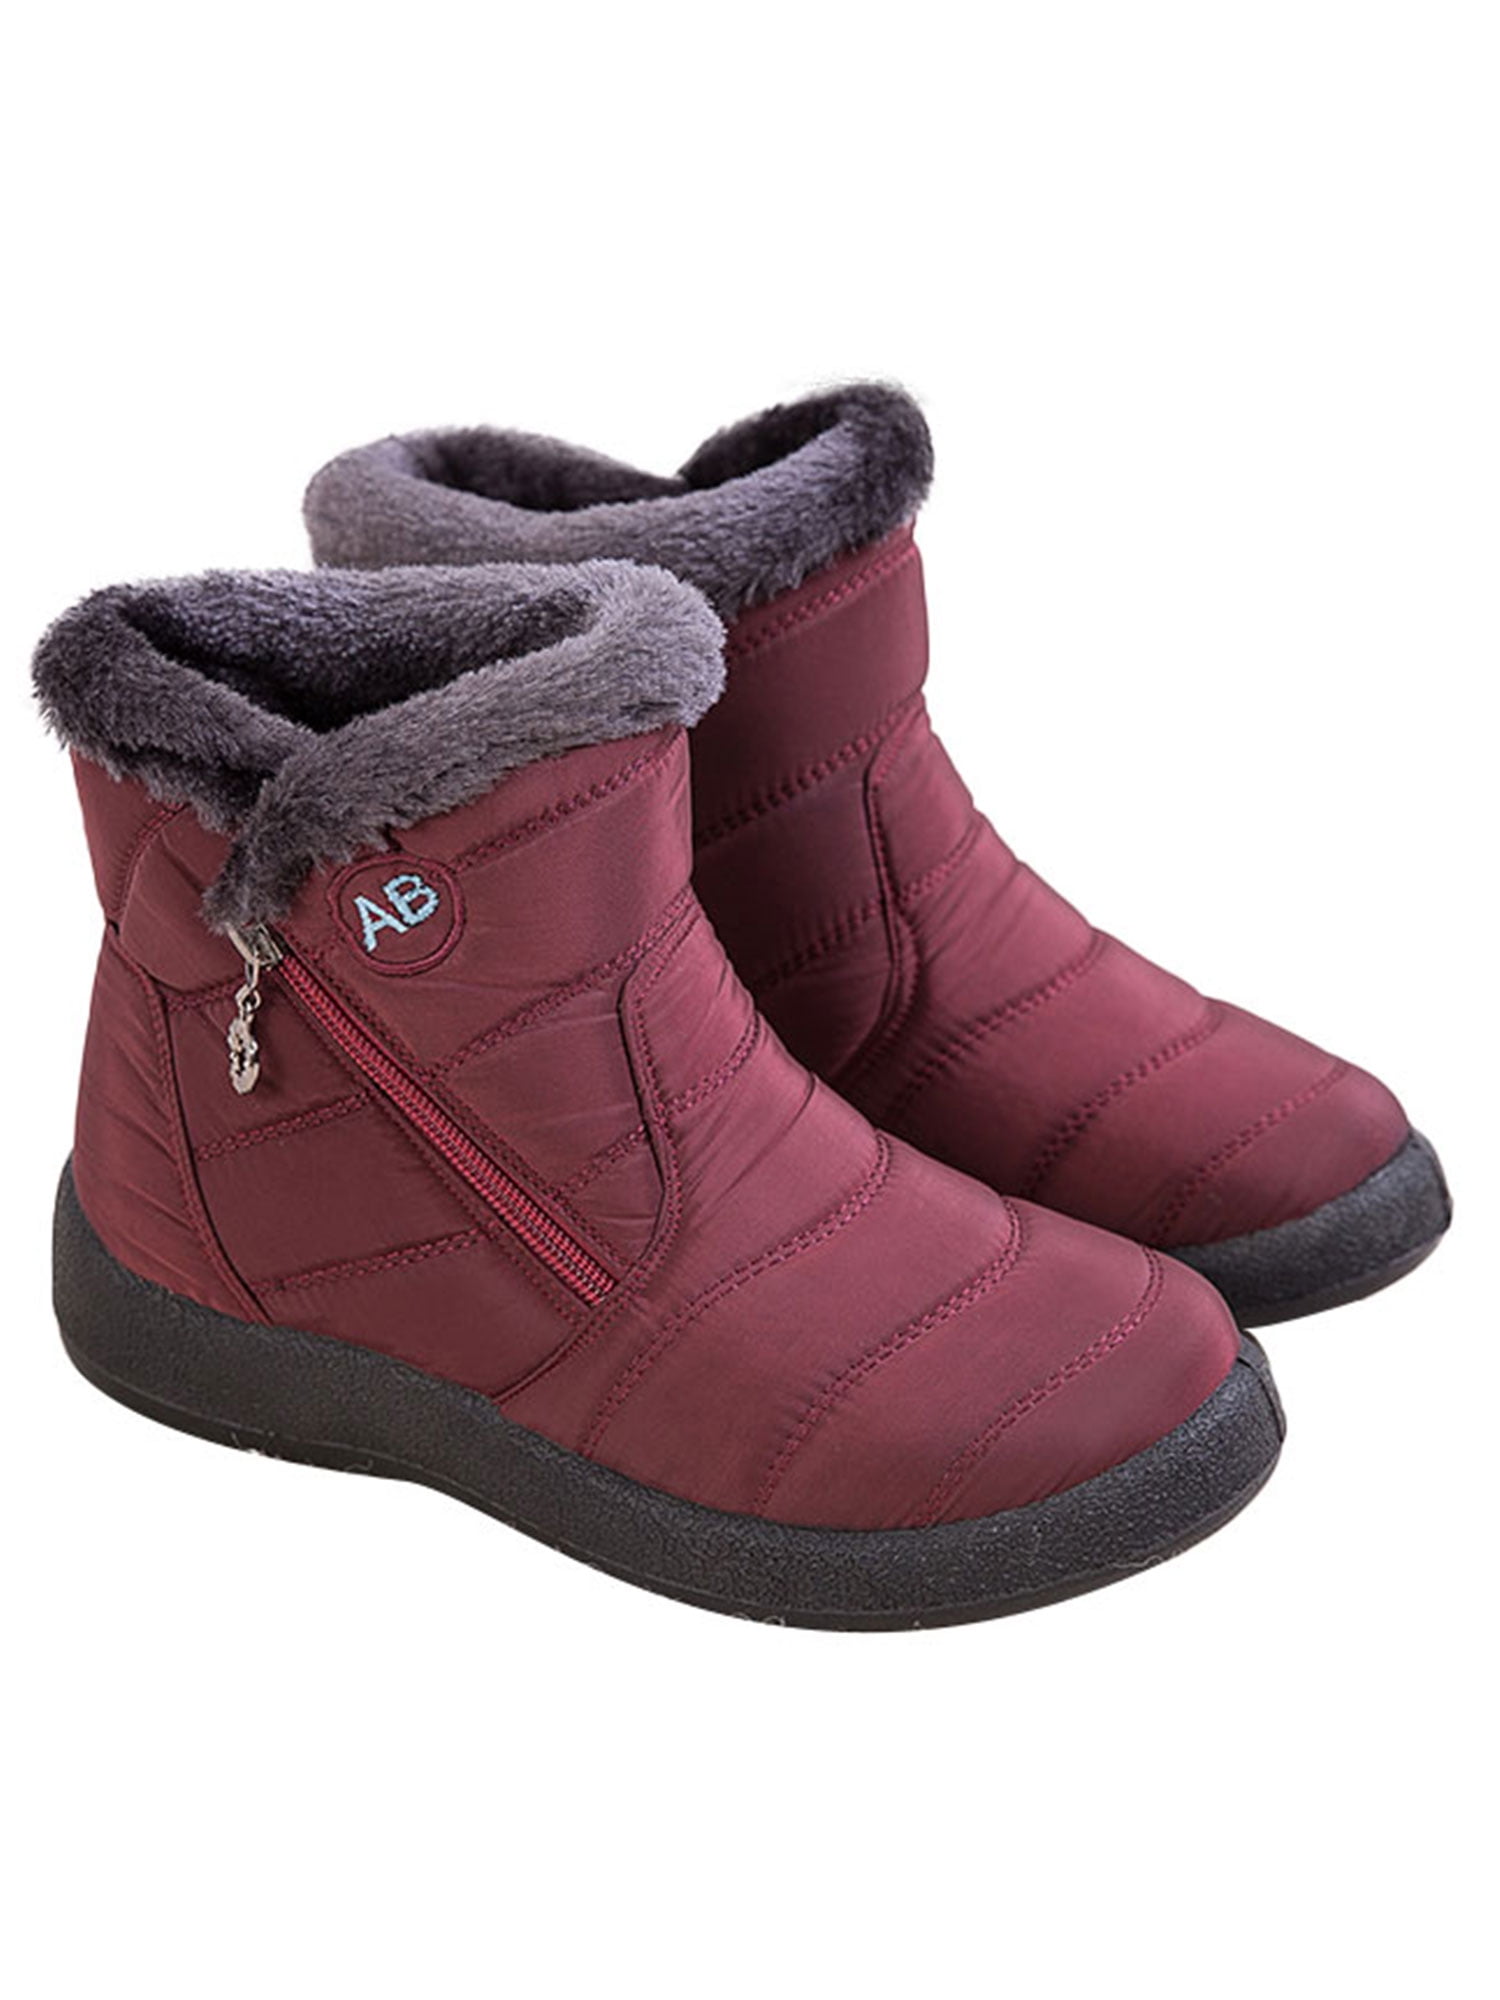 Stunner Women Warm Ankle Snow Boots Fur Lining Thickening Slip On Winter Shoes